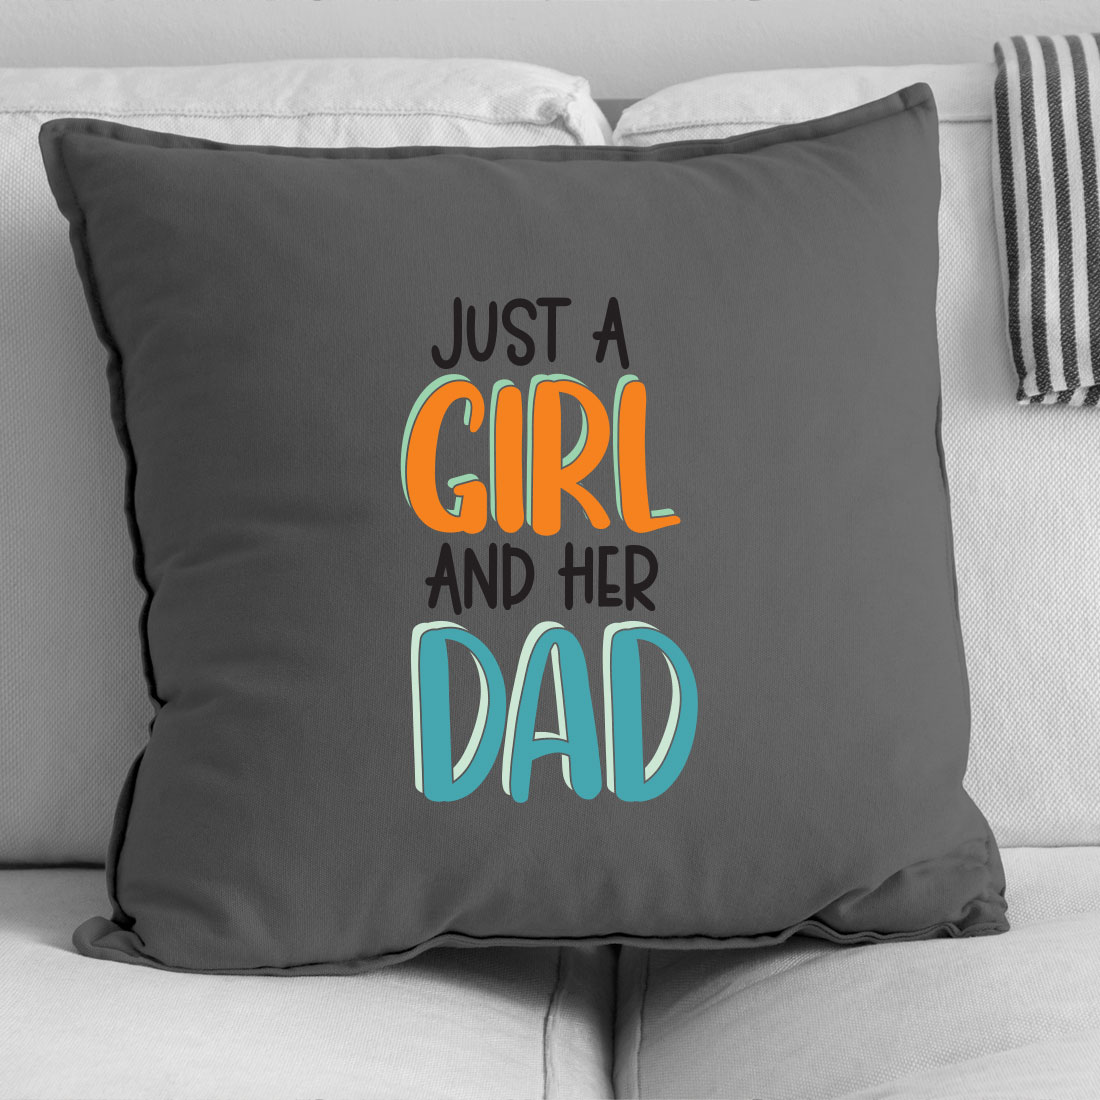 Pillow that says just a girl and her dad.